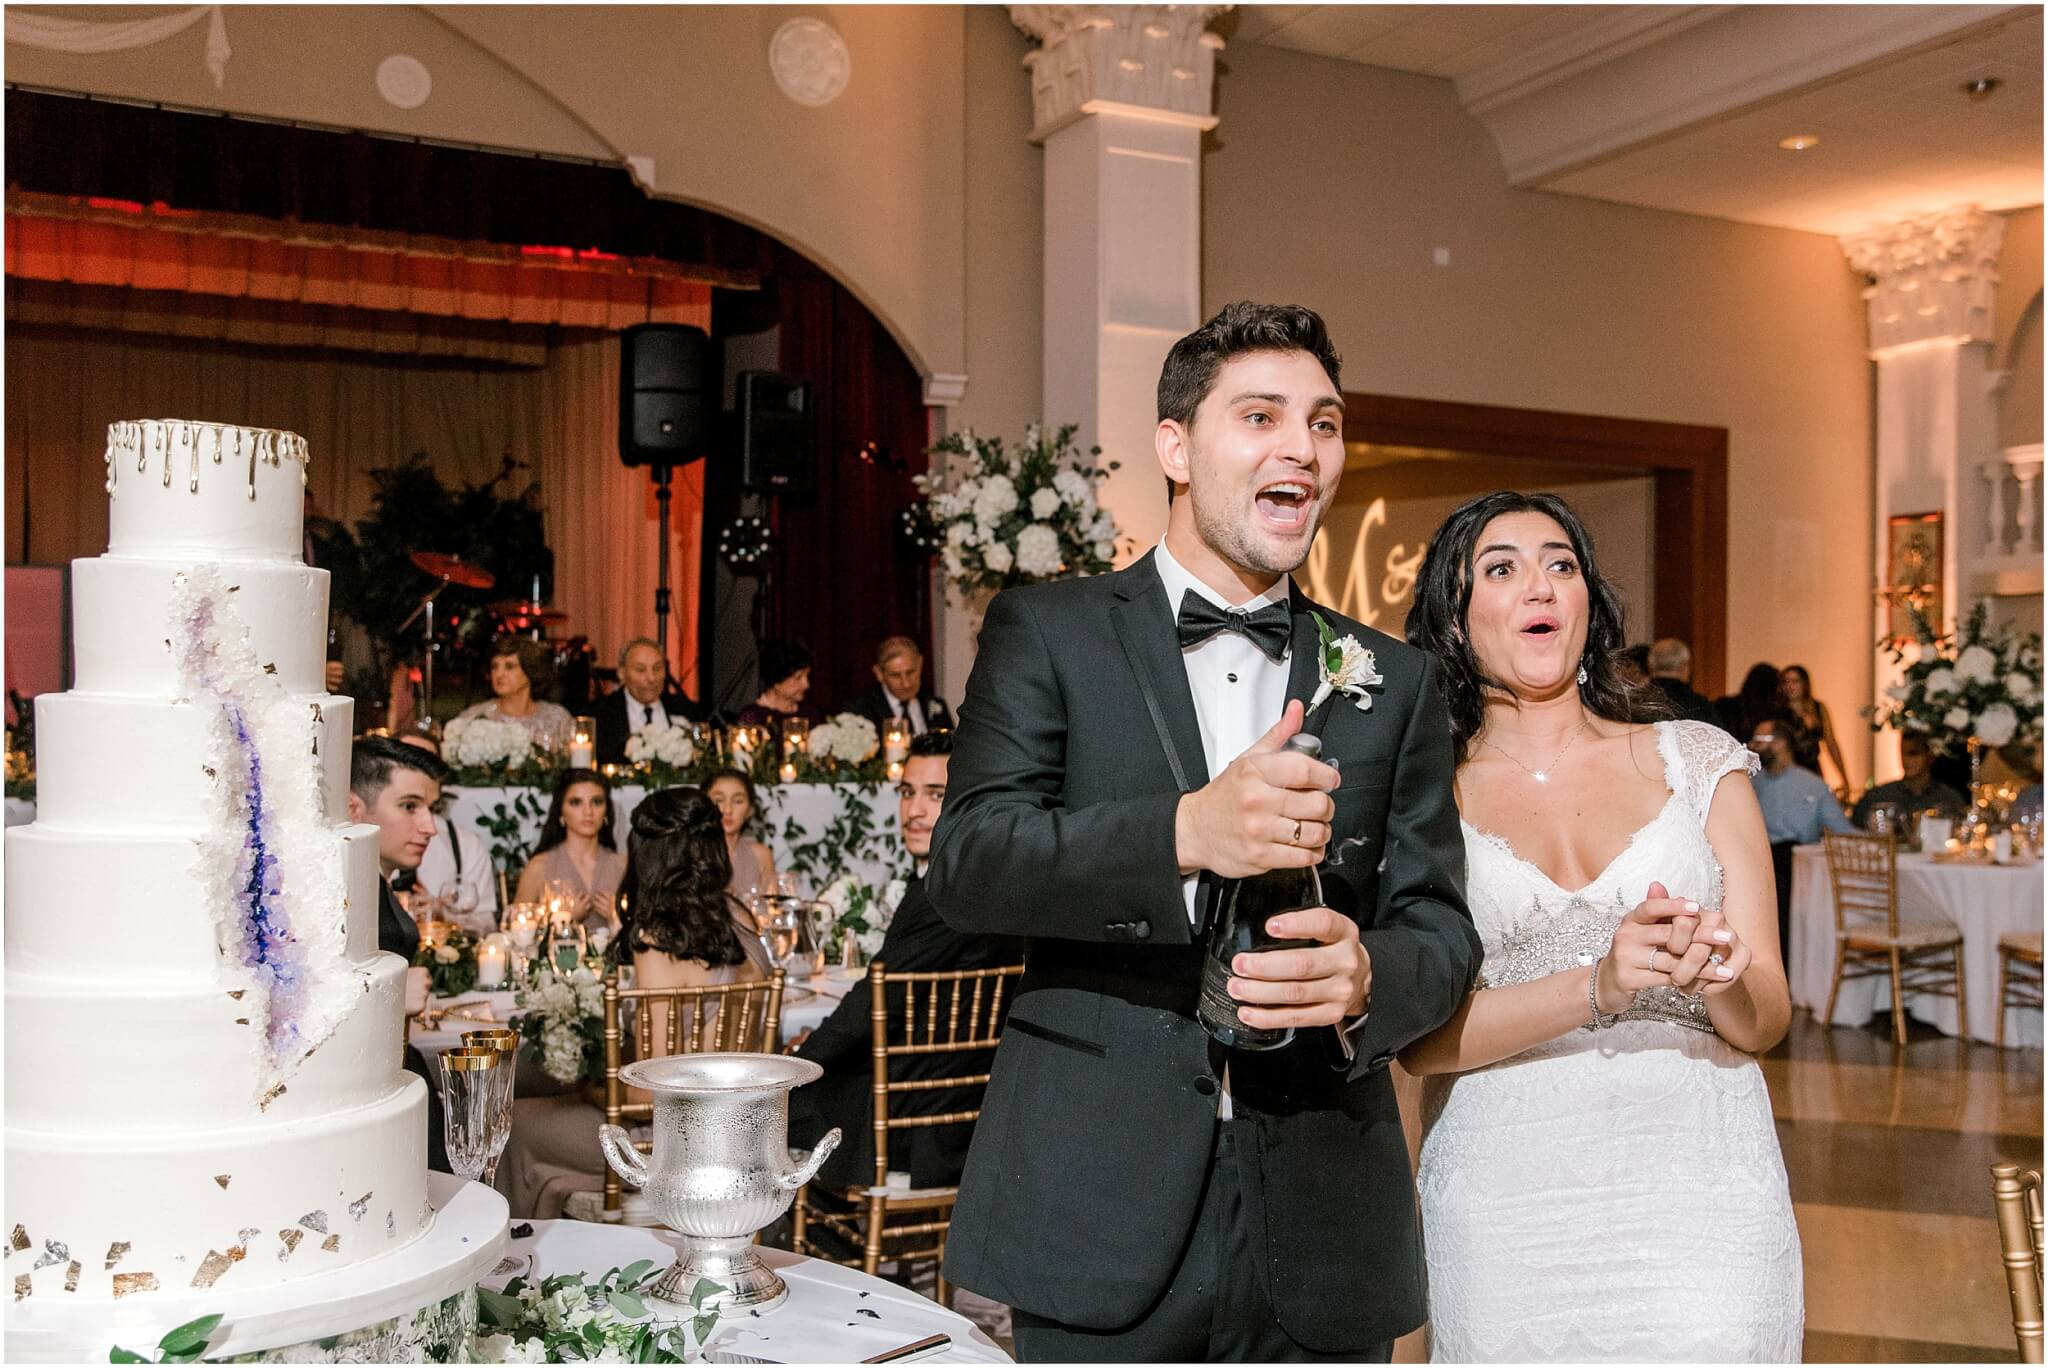 Popping champagne bottles before reception